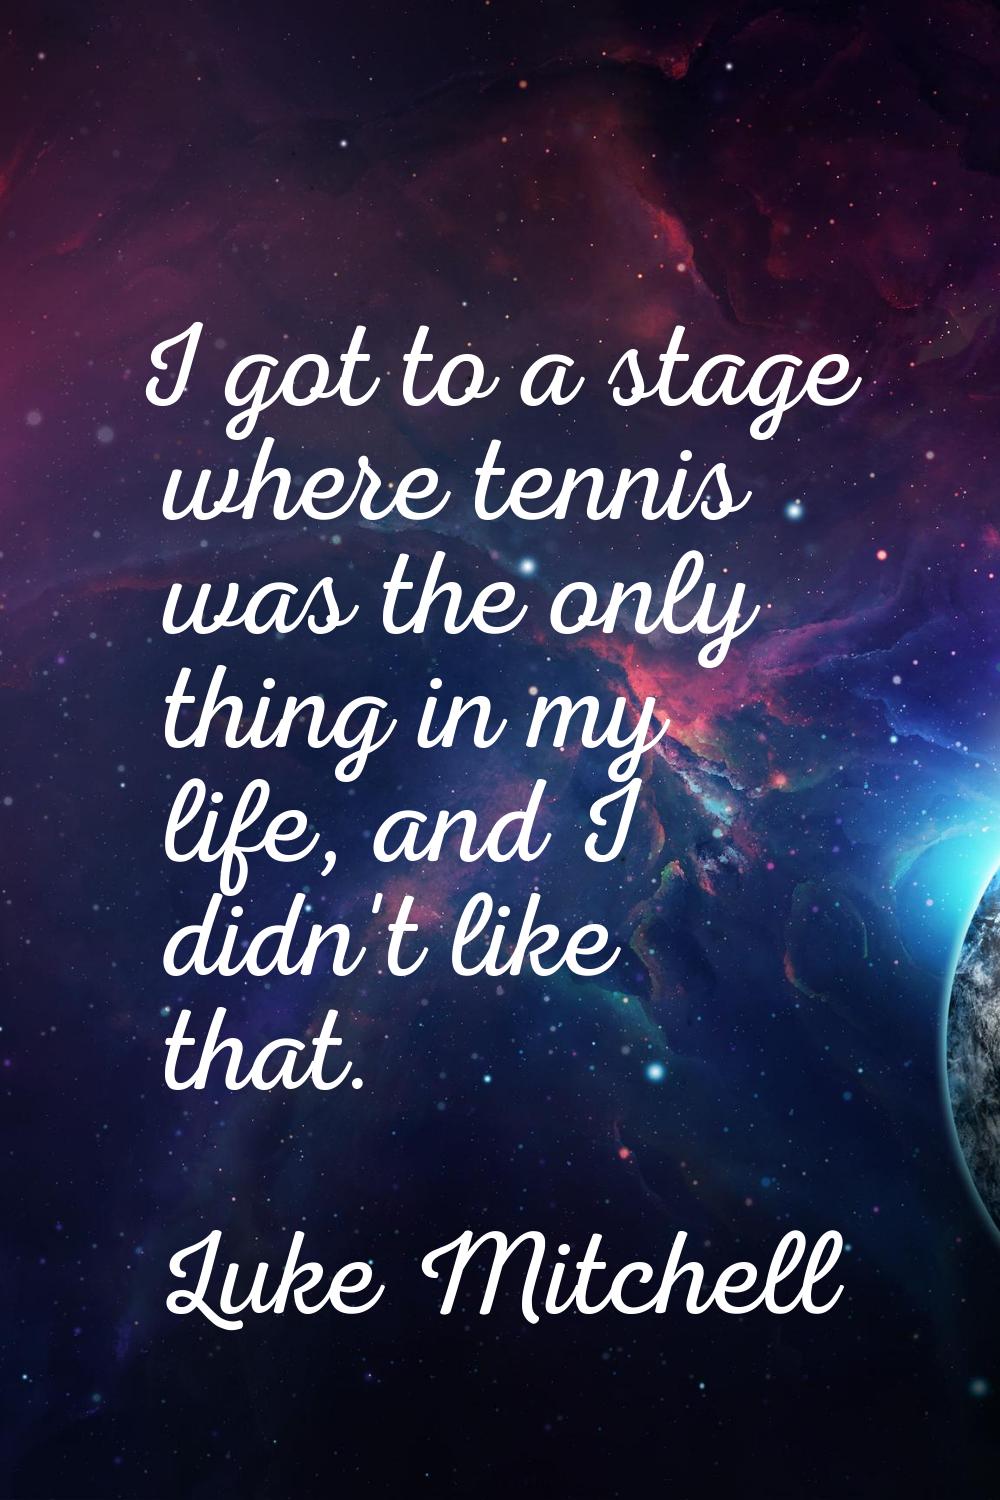 I got to a stage where tennis was the only thing in my life, and I didn't like that.